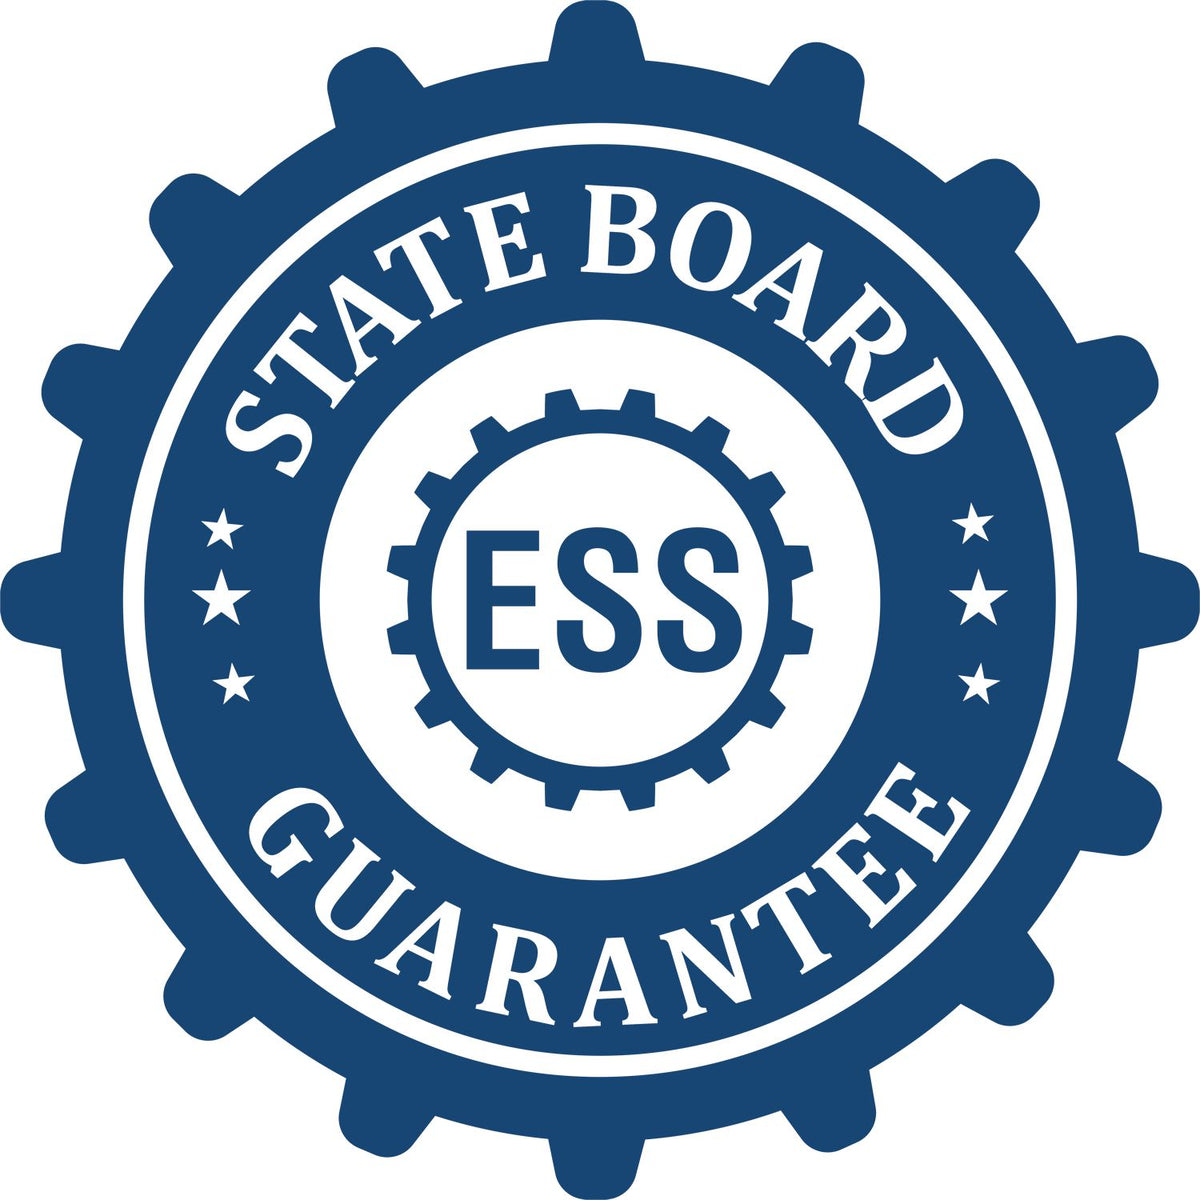 An emblem in a gear shape illustrating a state board guarantee for the Hybrid Illinois Geologist Seal